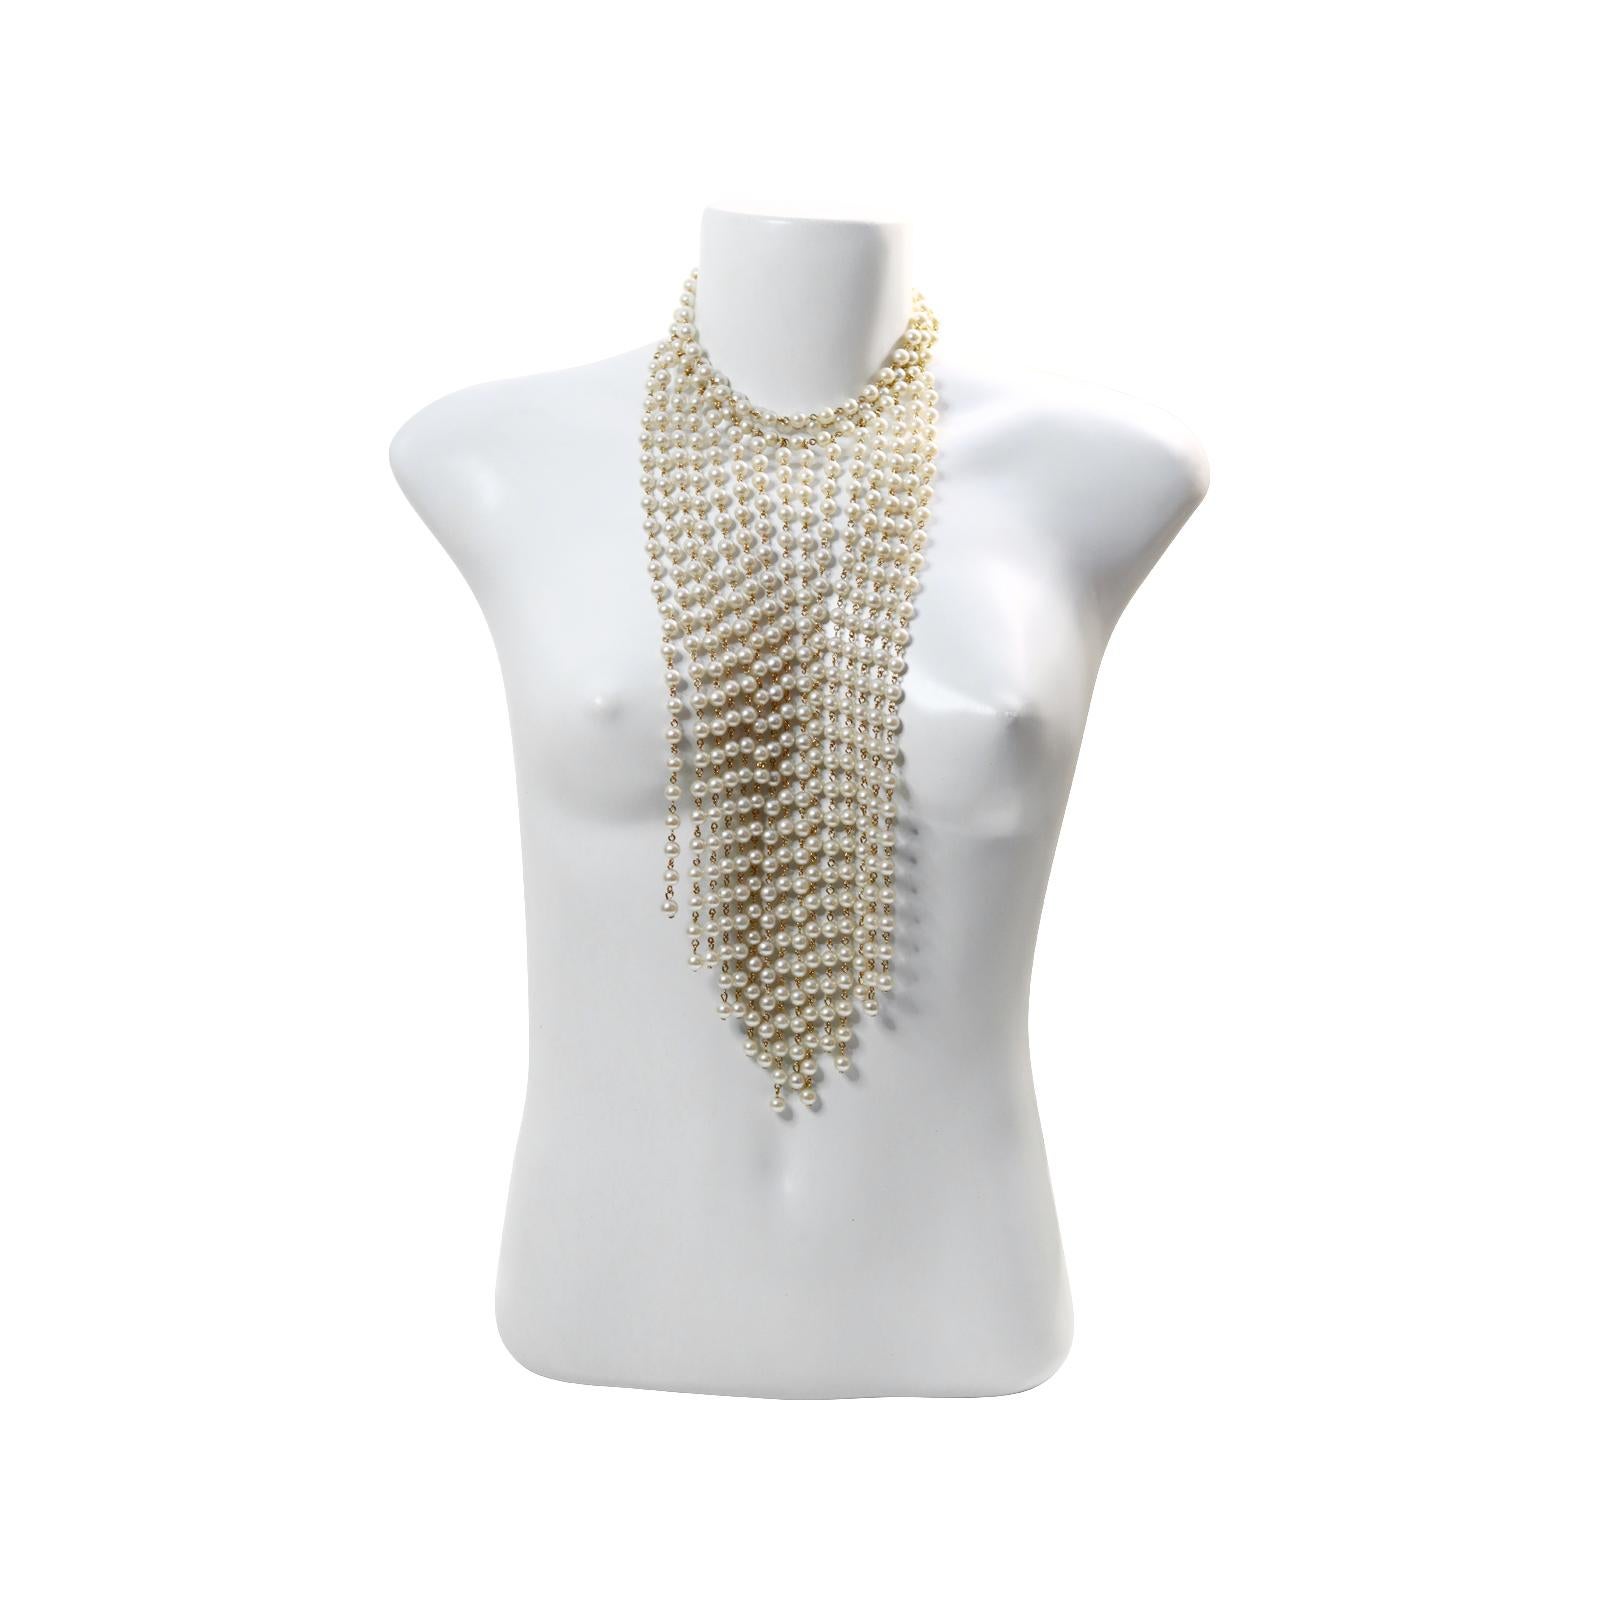 Vintage Faux Pearl Choker With Cascading Long Necklace Circa 1990s. This spectacular Choker/necklace has a 3 row choker that then has many dangling rows that hang vertically as you see in the photos to create the cascade.  Would look amazing on a t